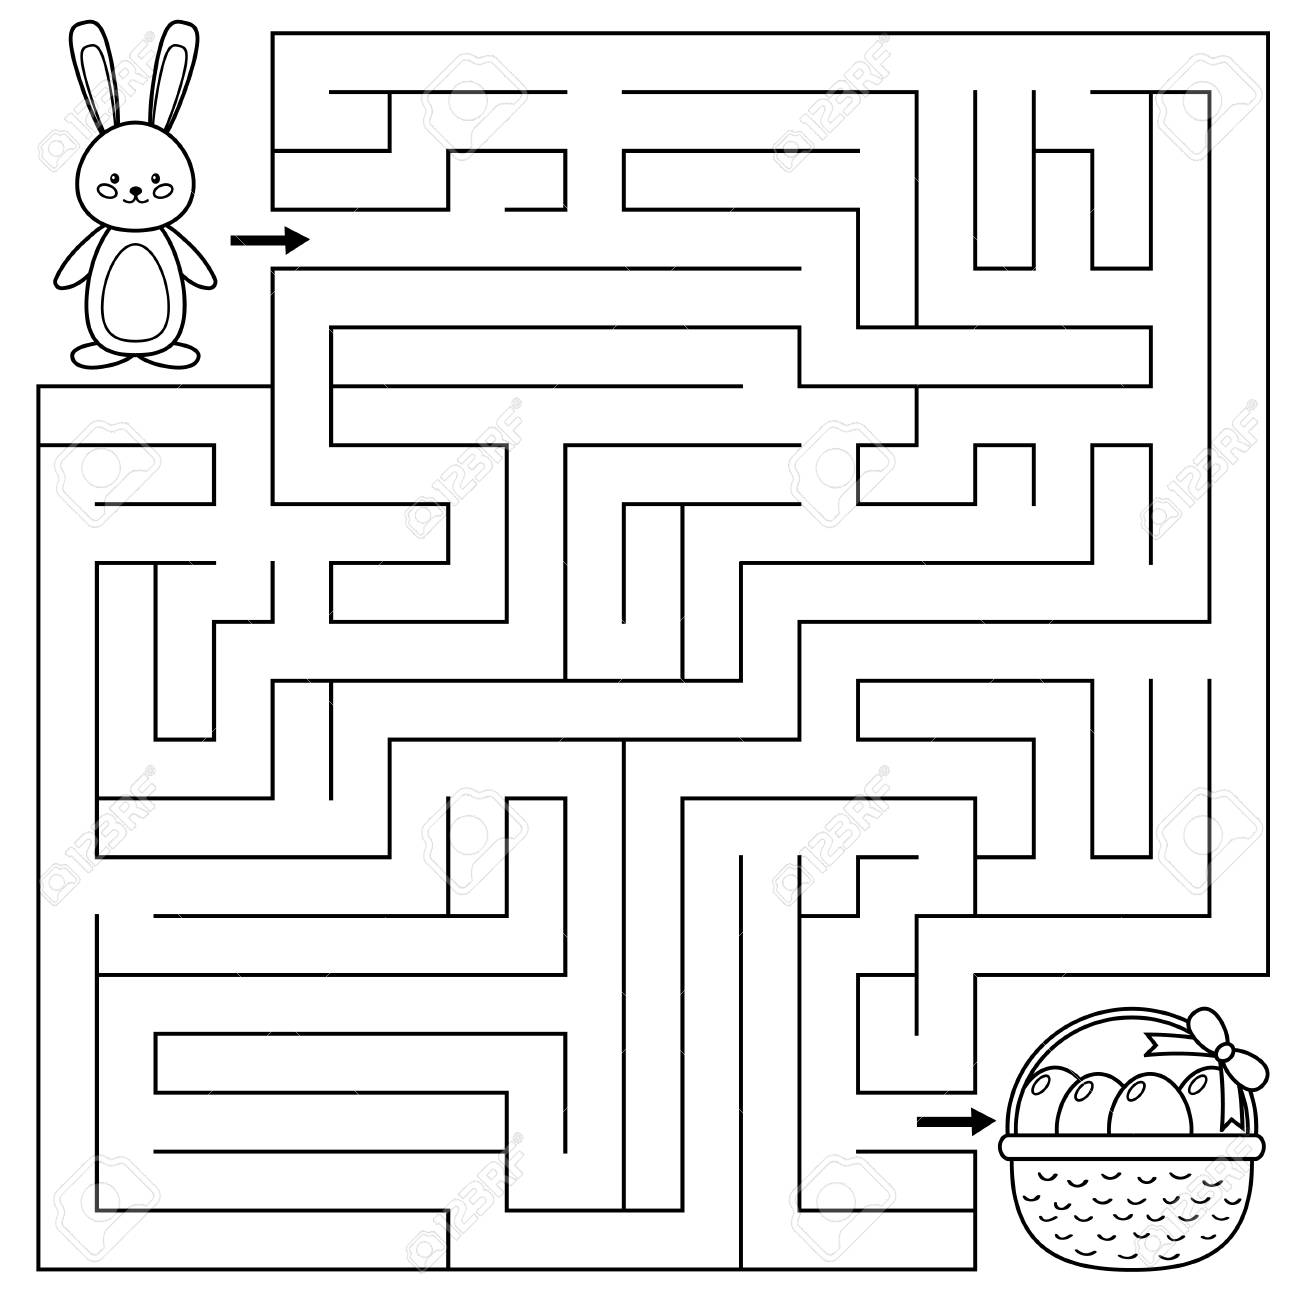 Easter maze game for preschool kids coloring page help the bunny find right way to the easter eggs vector illustration royalty free svg cliparts vectors and stock illustration image